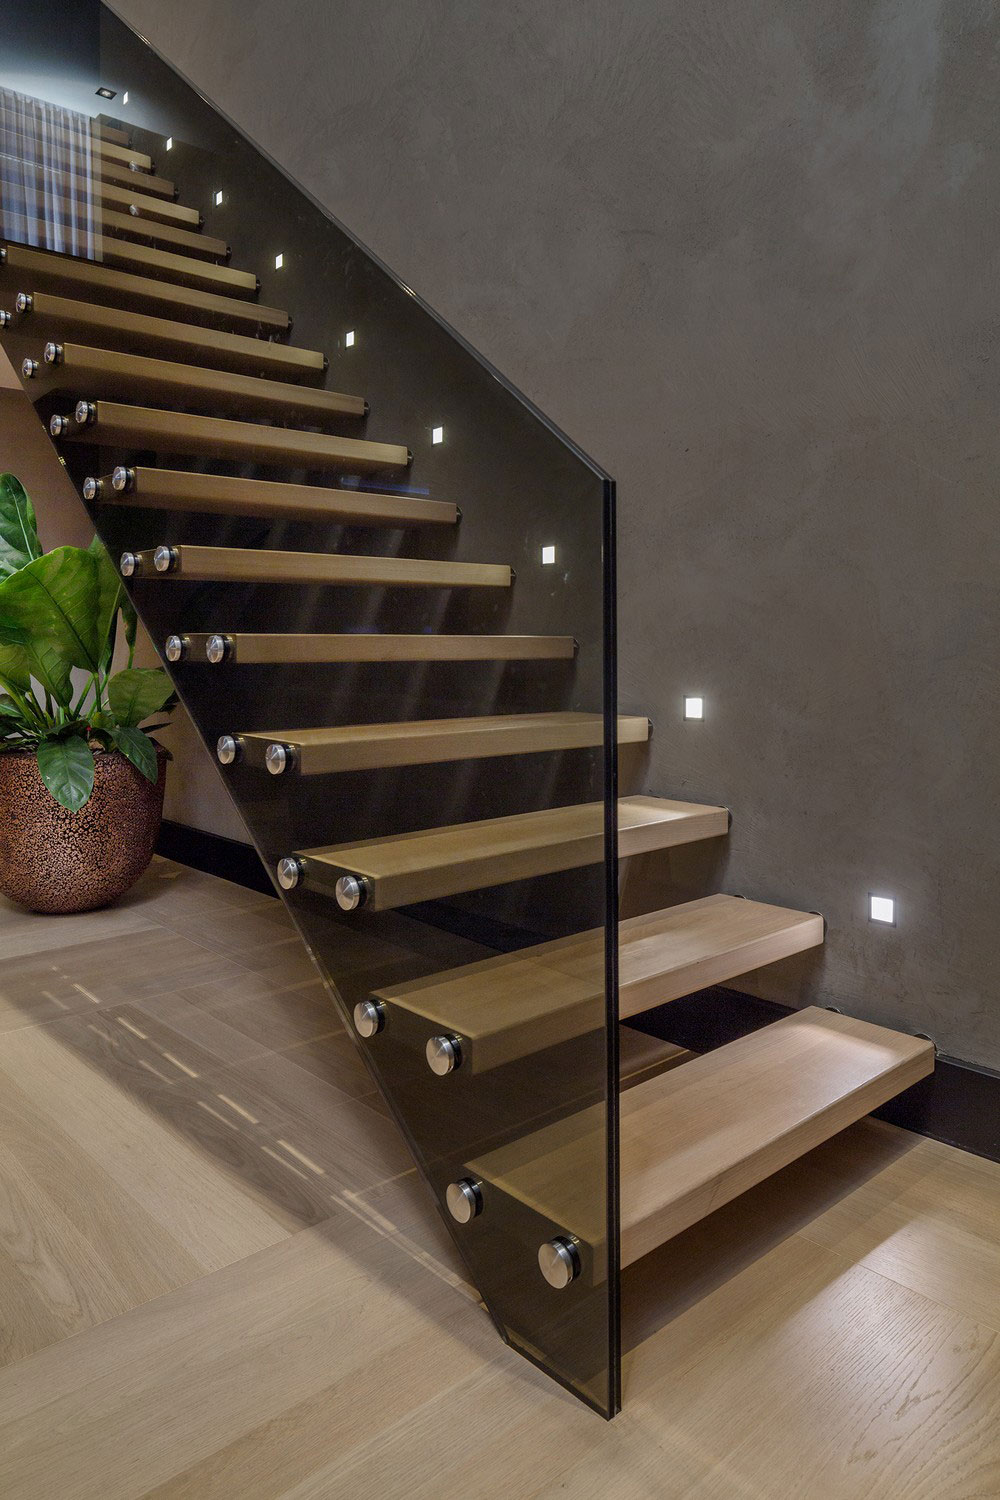 Floating Wooden With Contemporary Floating Wooden Sttaircase Idea With Stainless Steel Nails And Dark Glass Stair Handle To Reflect Modern Rotterdam Residence House Designs  Contemporary Villa Interior With Sophisticated Chic Design 